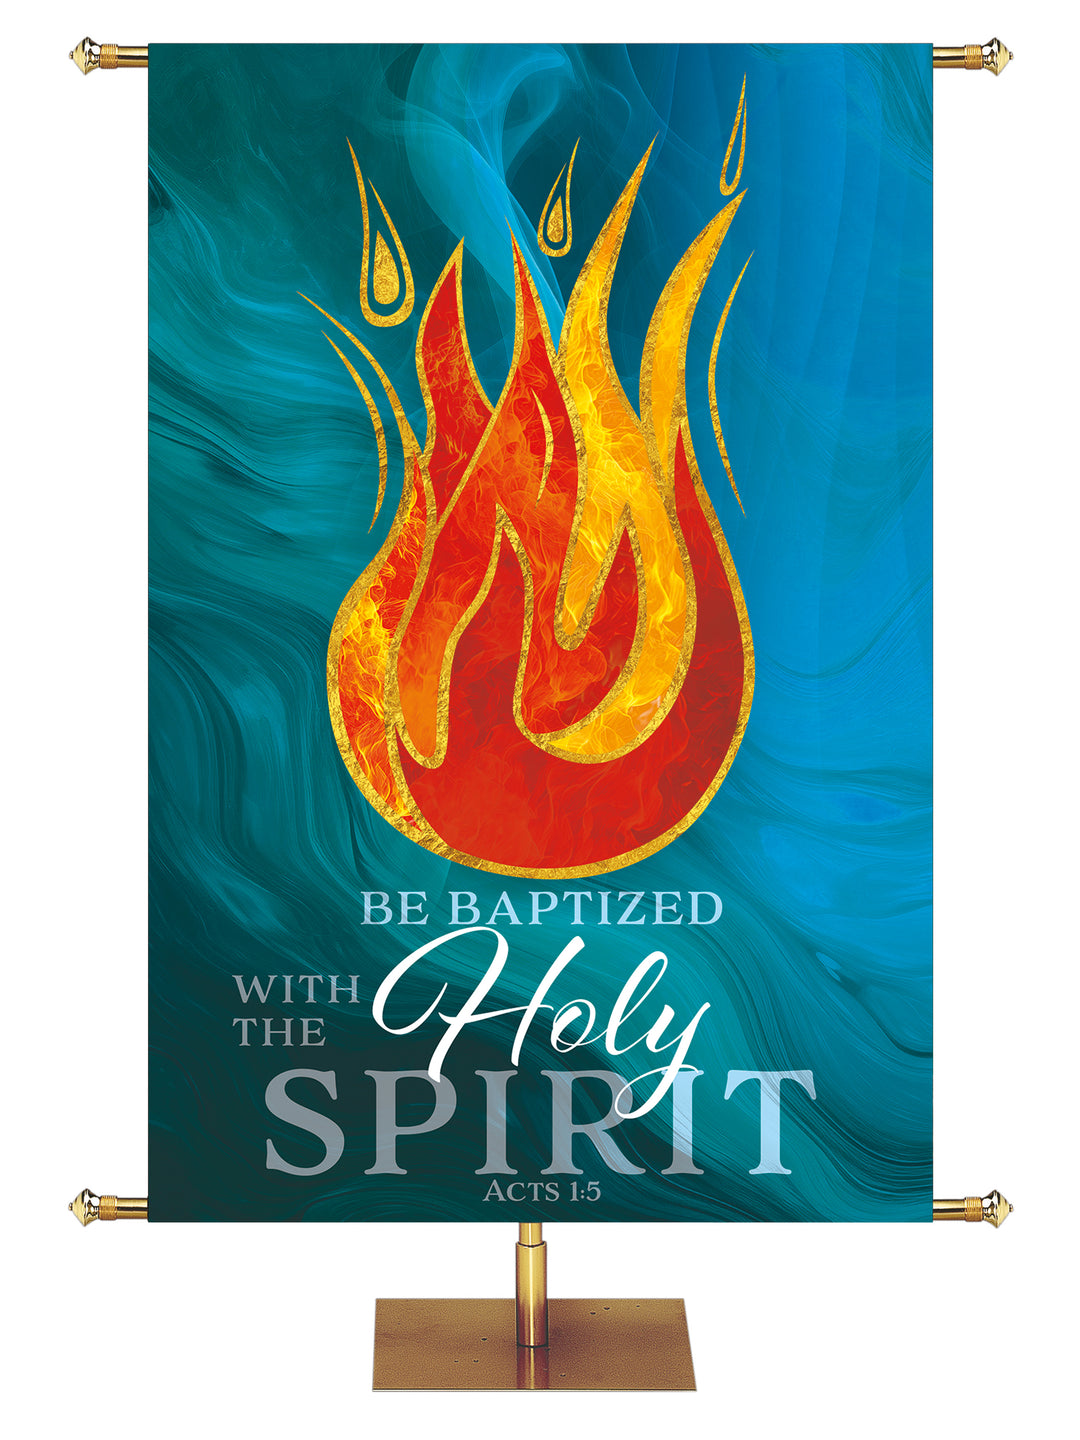 Be Baptized With The Holy Spirit Baptism Church Banner with Flame symbol outlined in gold on blue, left facing